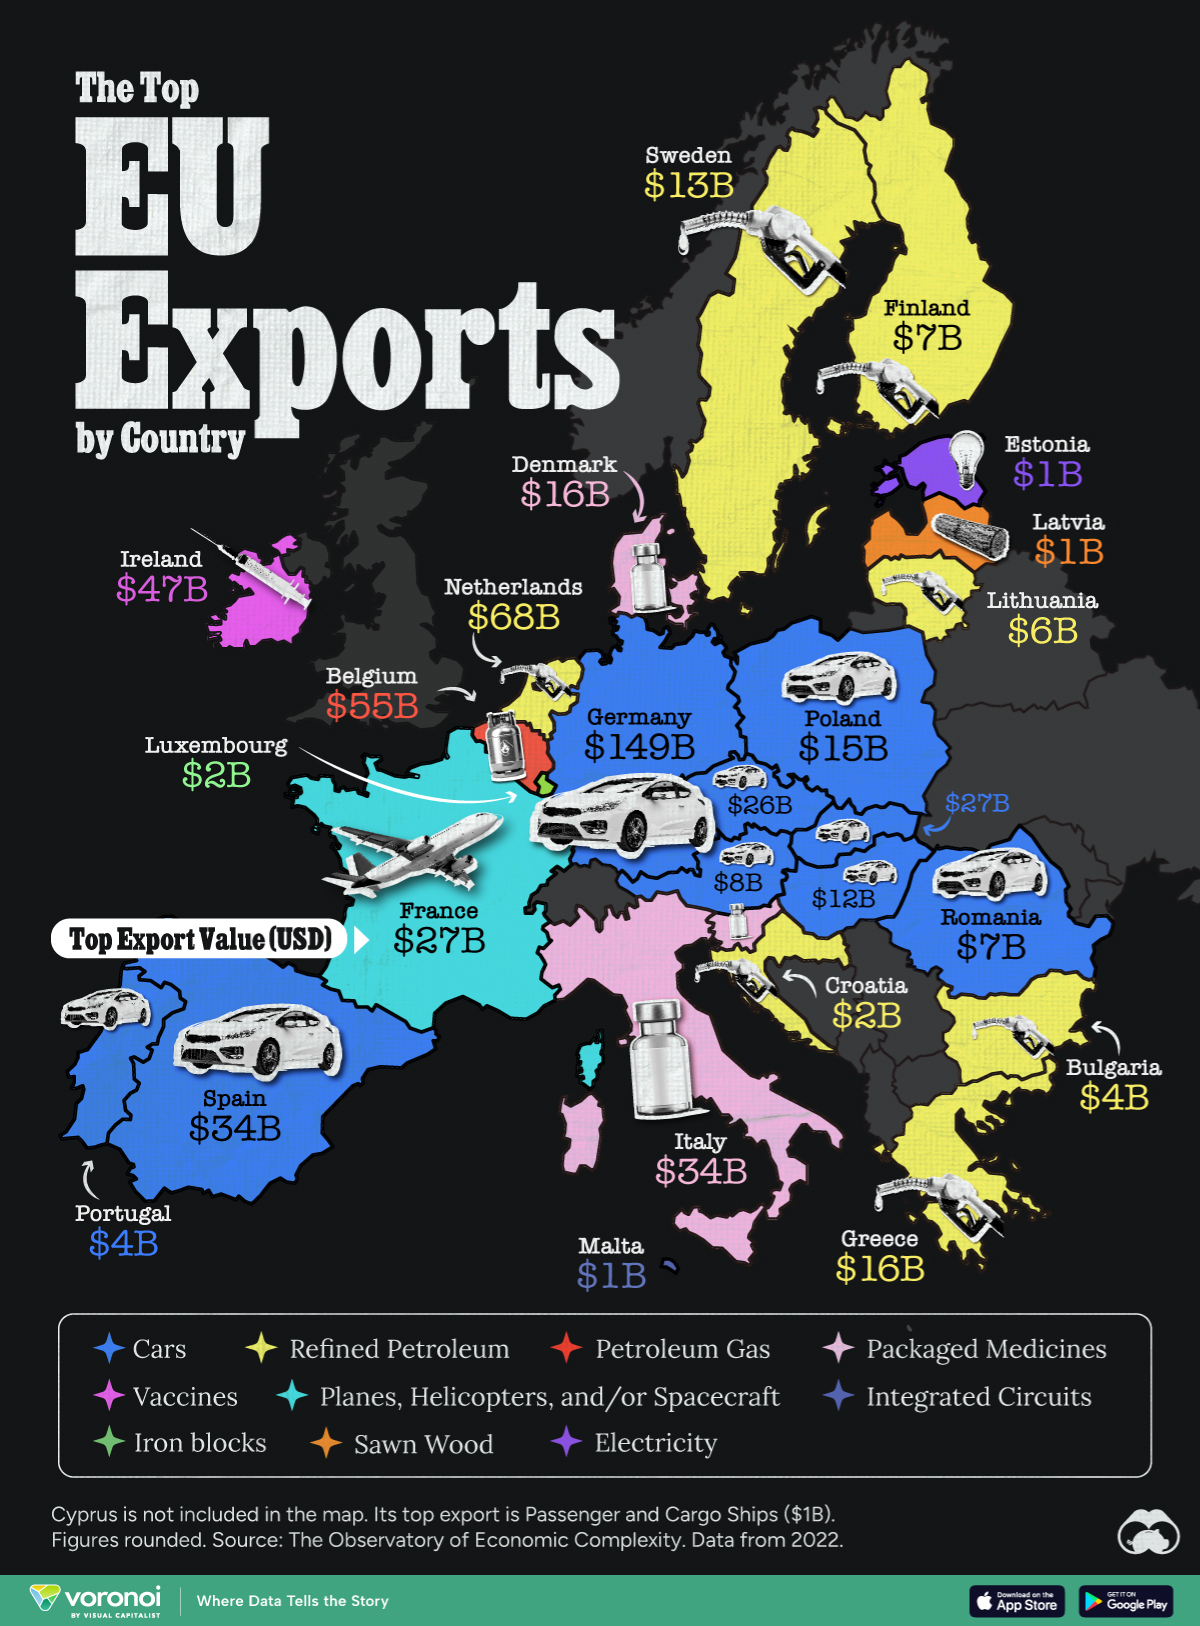 Map displaying European Union countries' top exports (as of 2022).